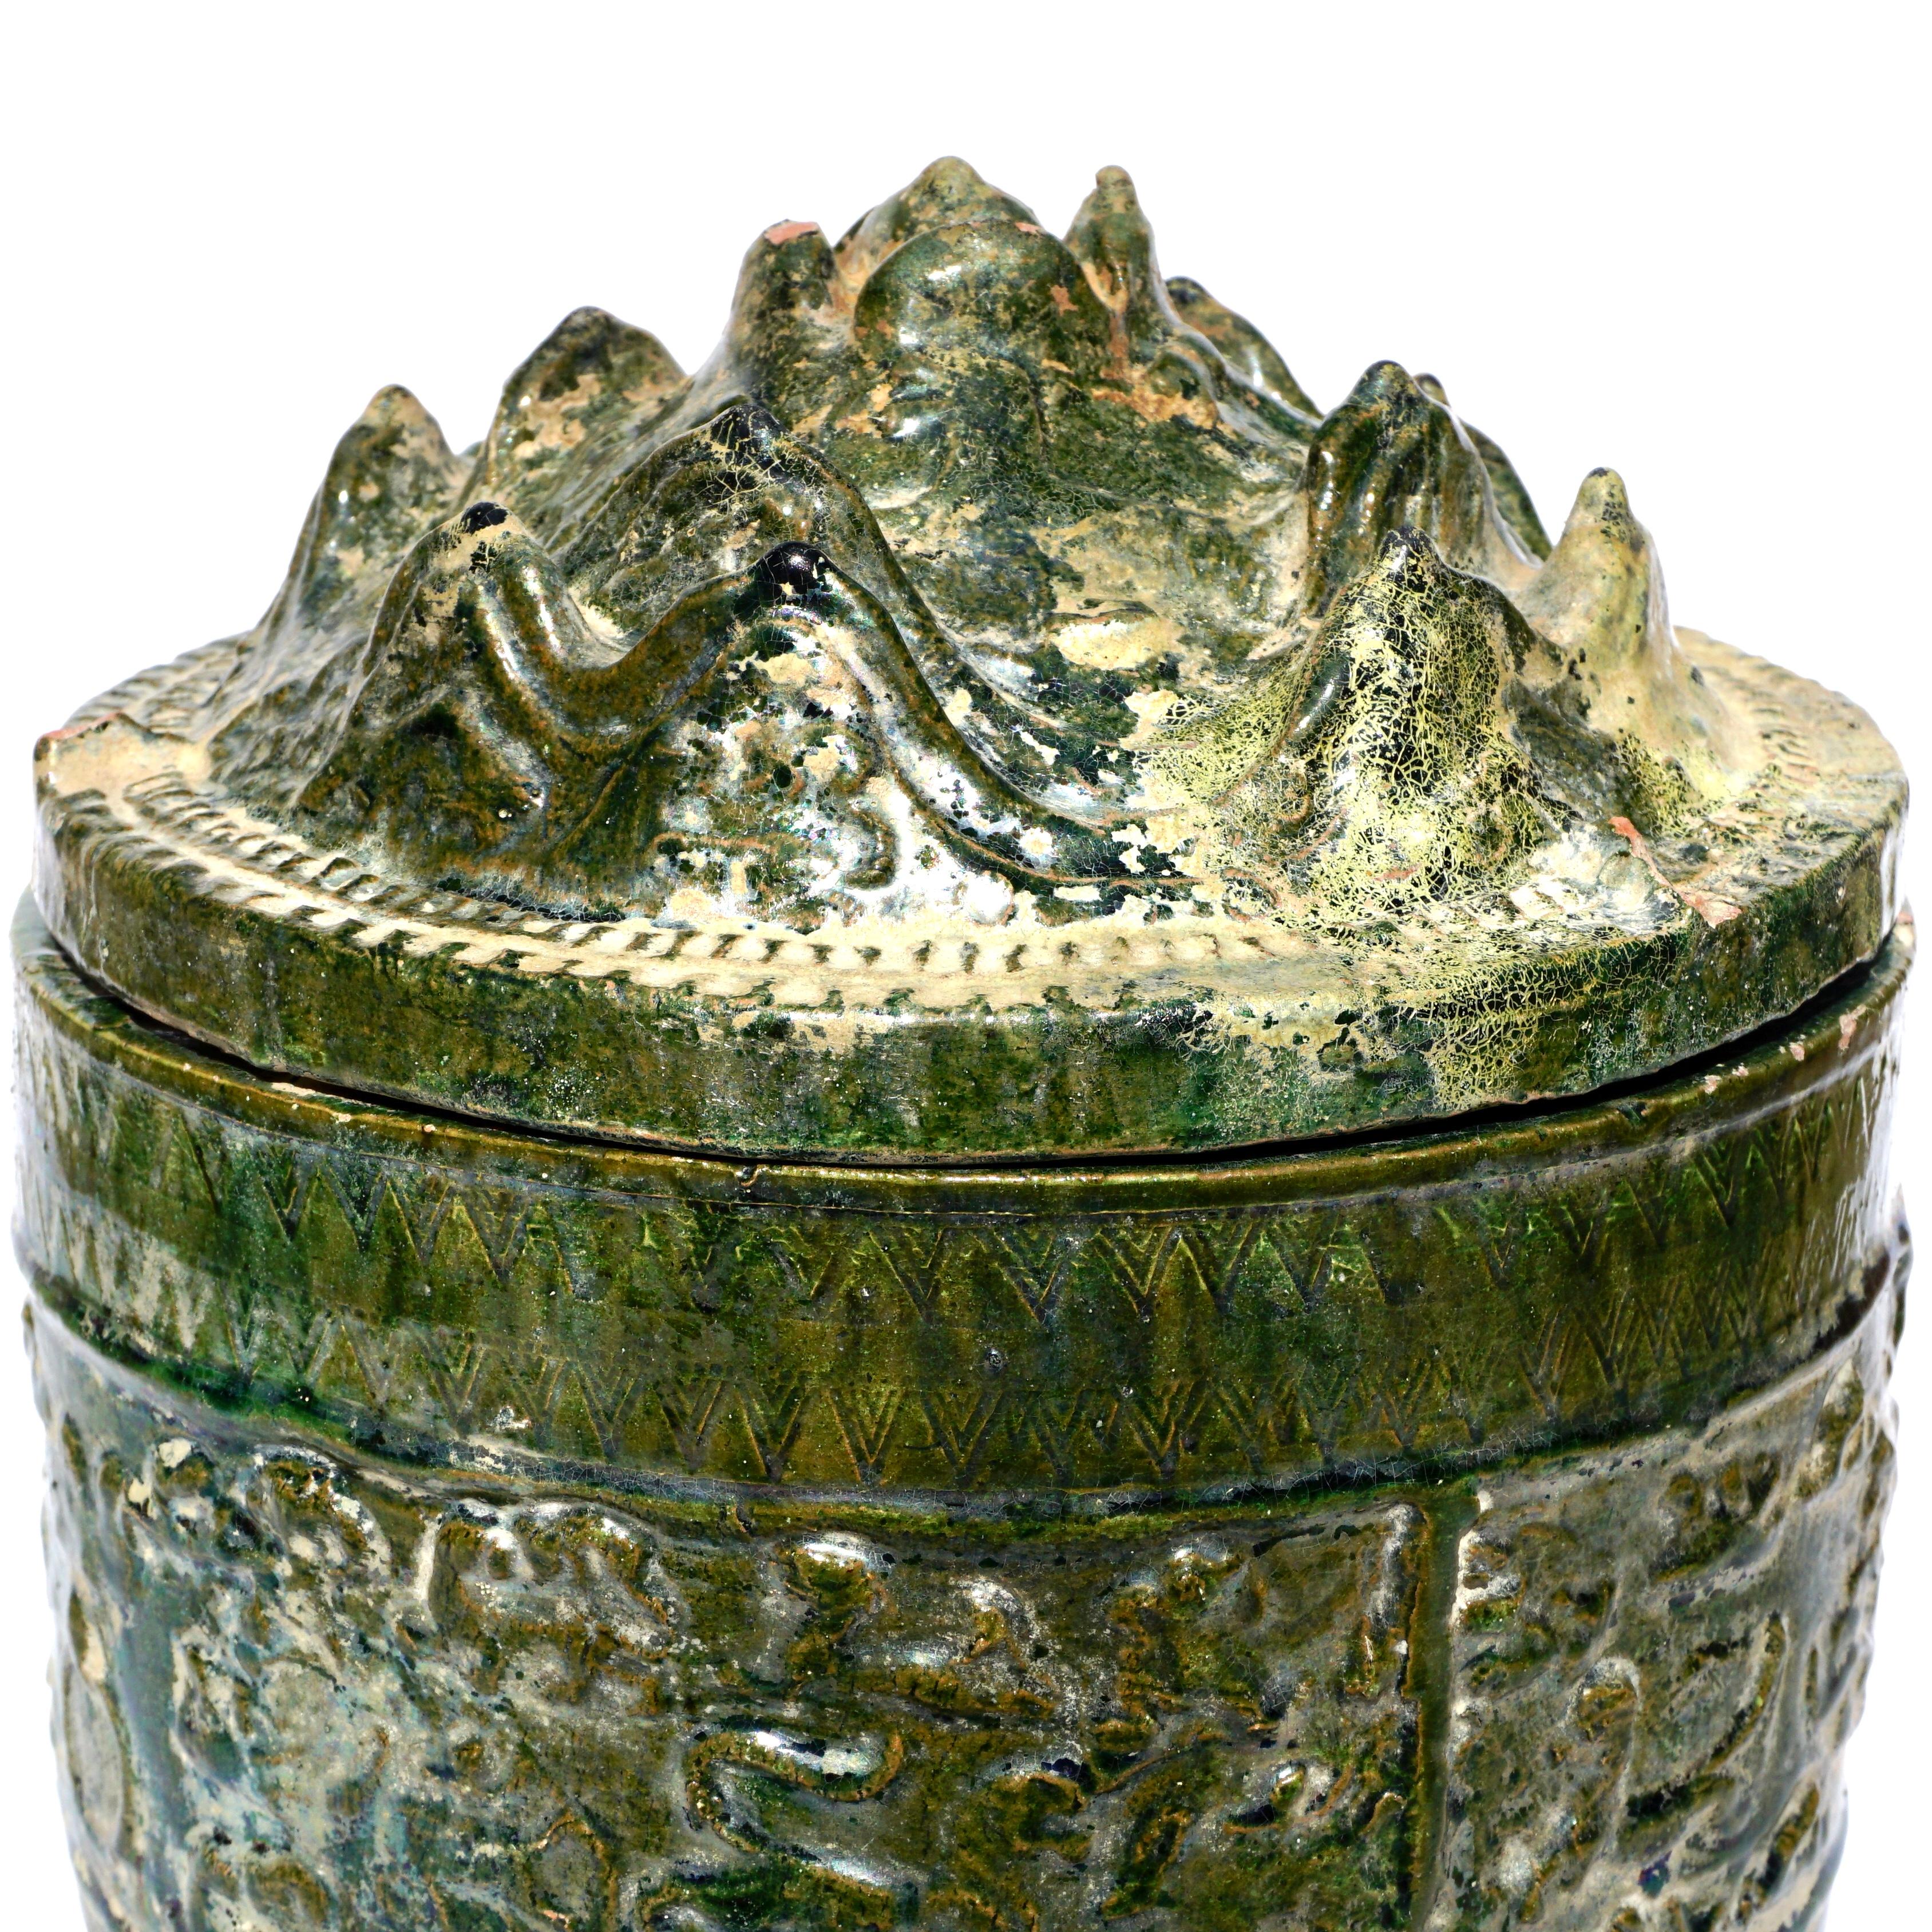 Han earthenware celedon glazed hill jar

The hill jar represents the five sacred mountains which is the path between the earth and Paradise. The mountains are filled with animals that live there. This jar might also represent either Mount Bo or